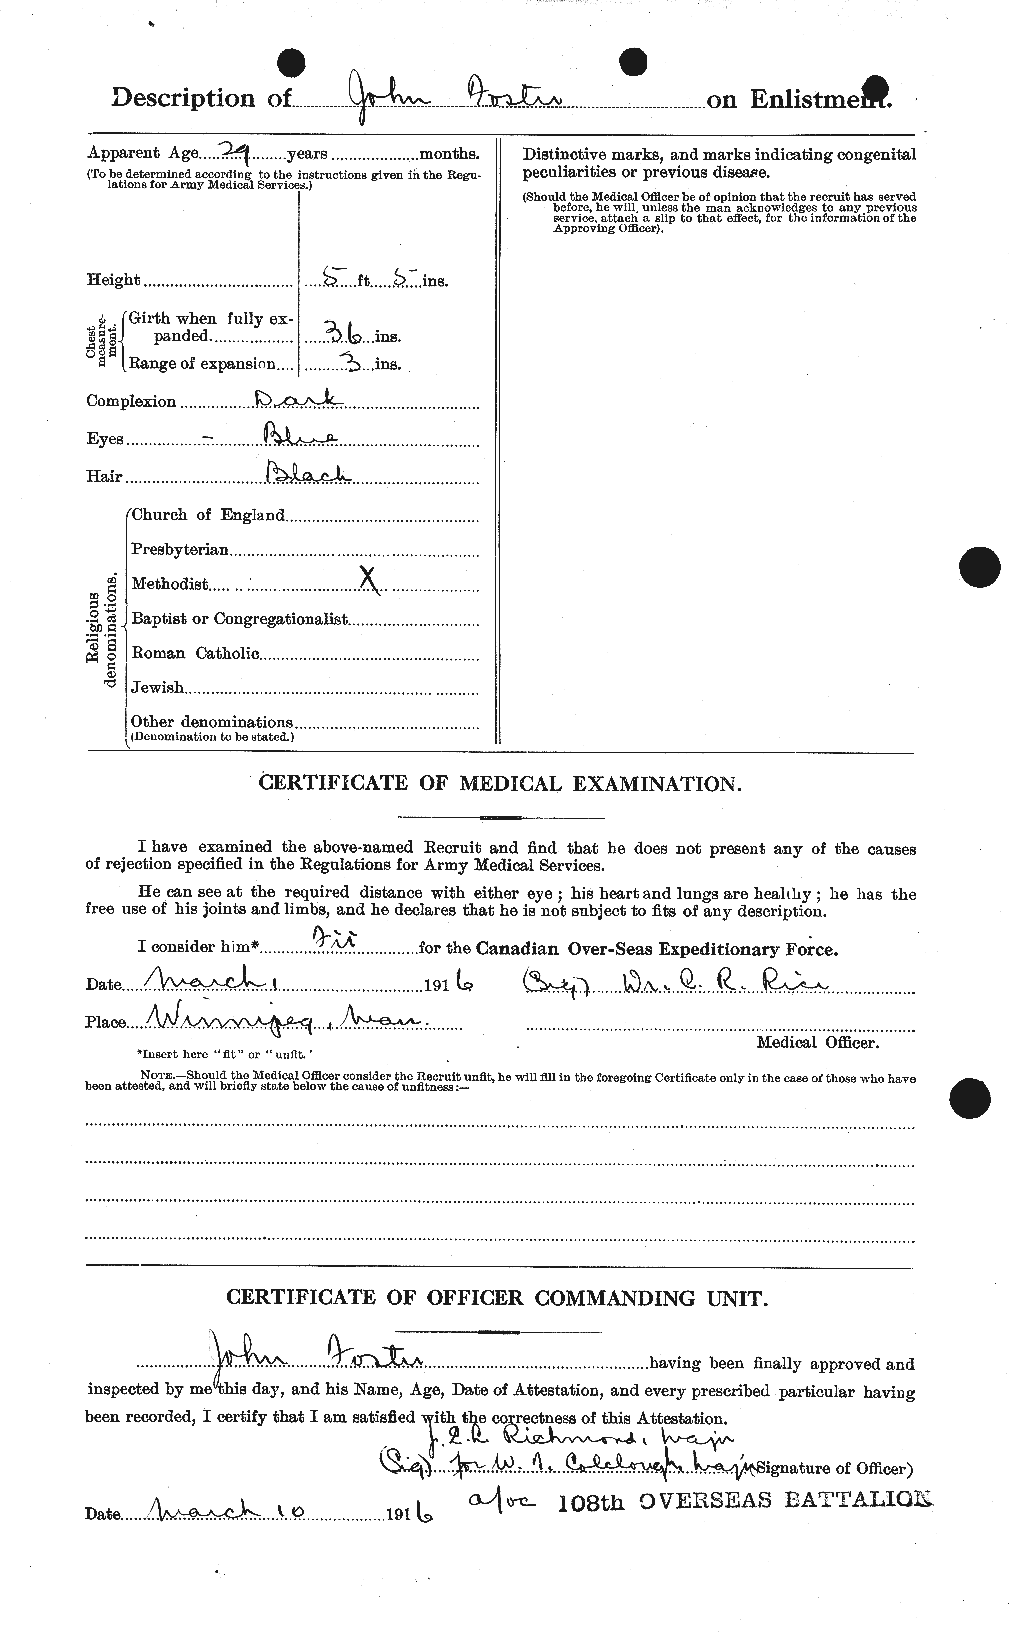 Personnel Records of the First World War - CEF 333339b